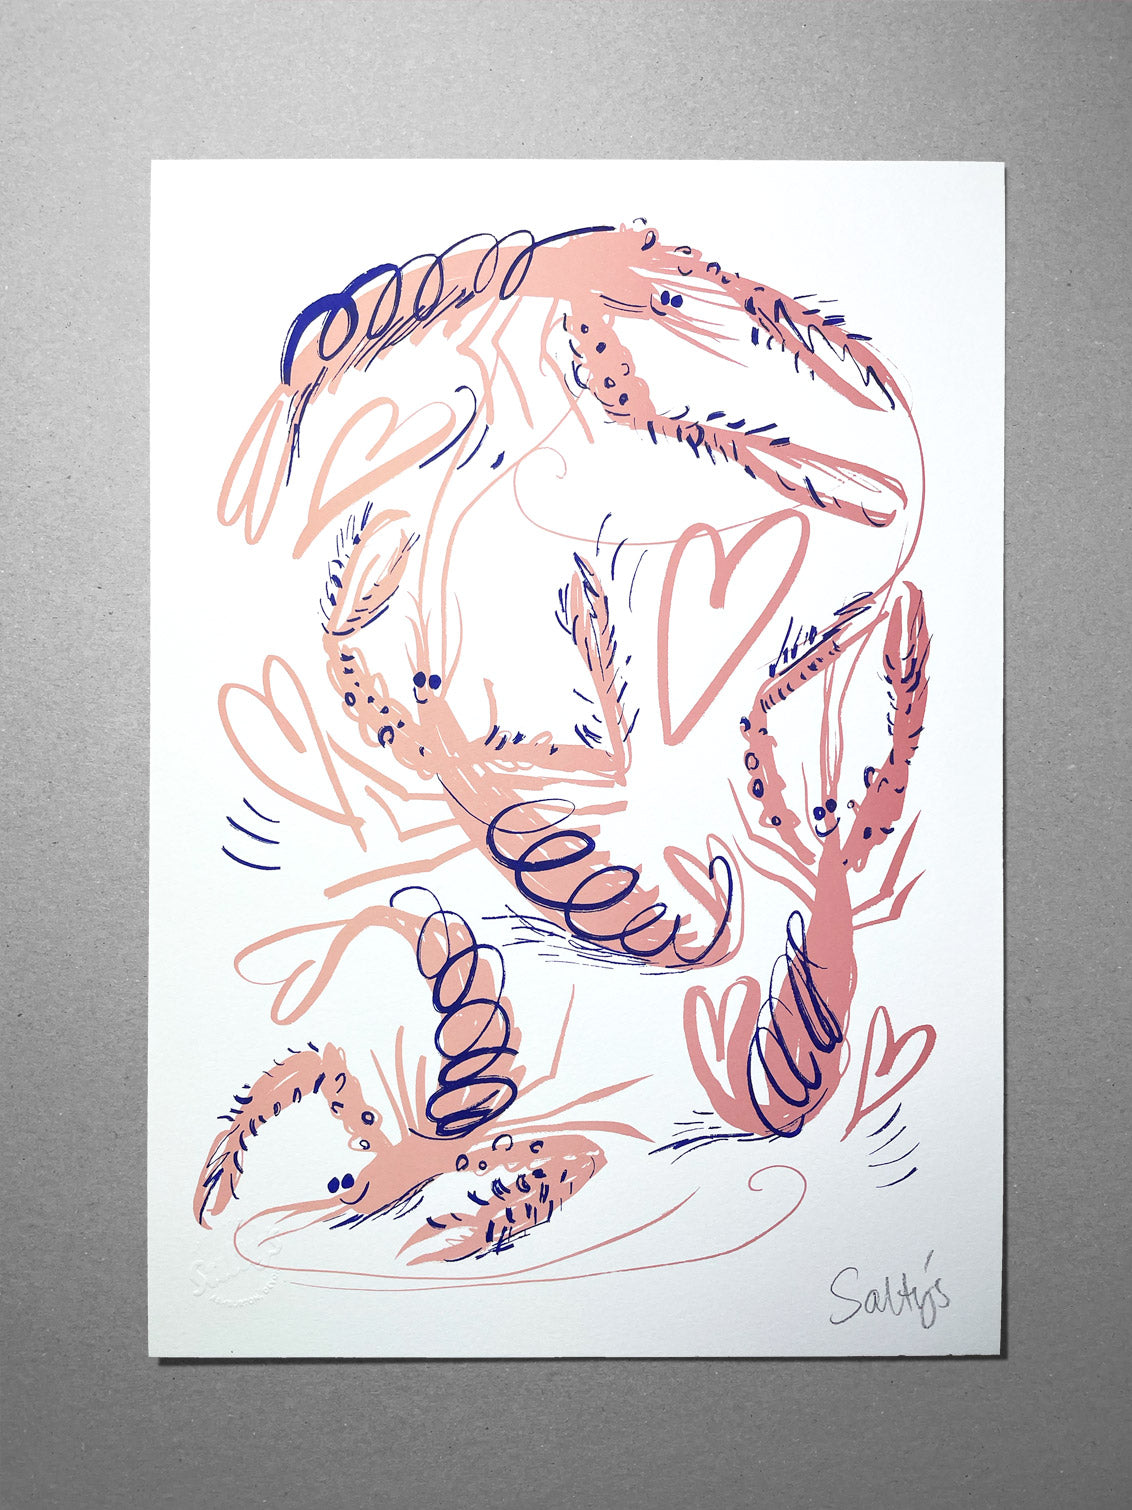 Flat lay of a few sheets of paper showing our pink cartoon langoustine, flung into a frenzied swirl, with hearts and scribbles making this a joyful scene. These are creenprinted in pink with blue accents on a grey recycled card background.